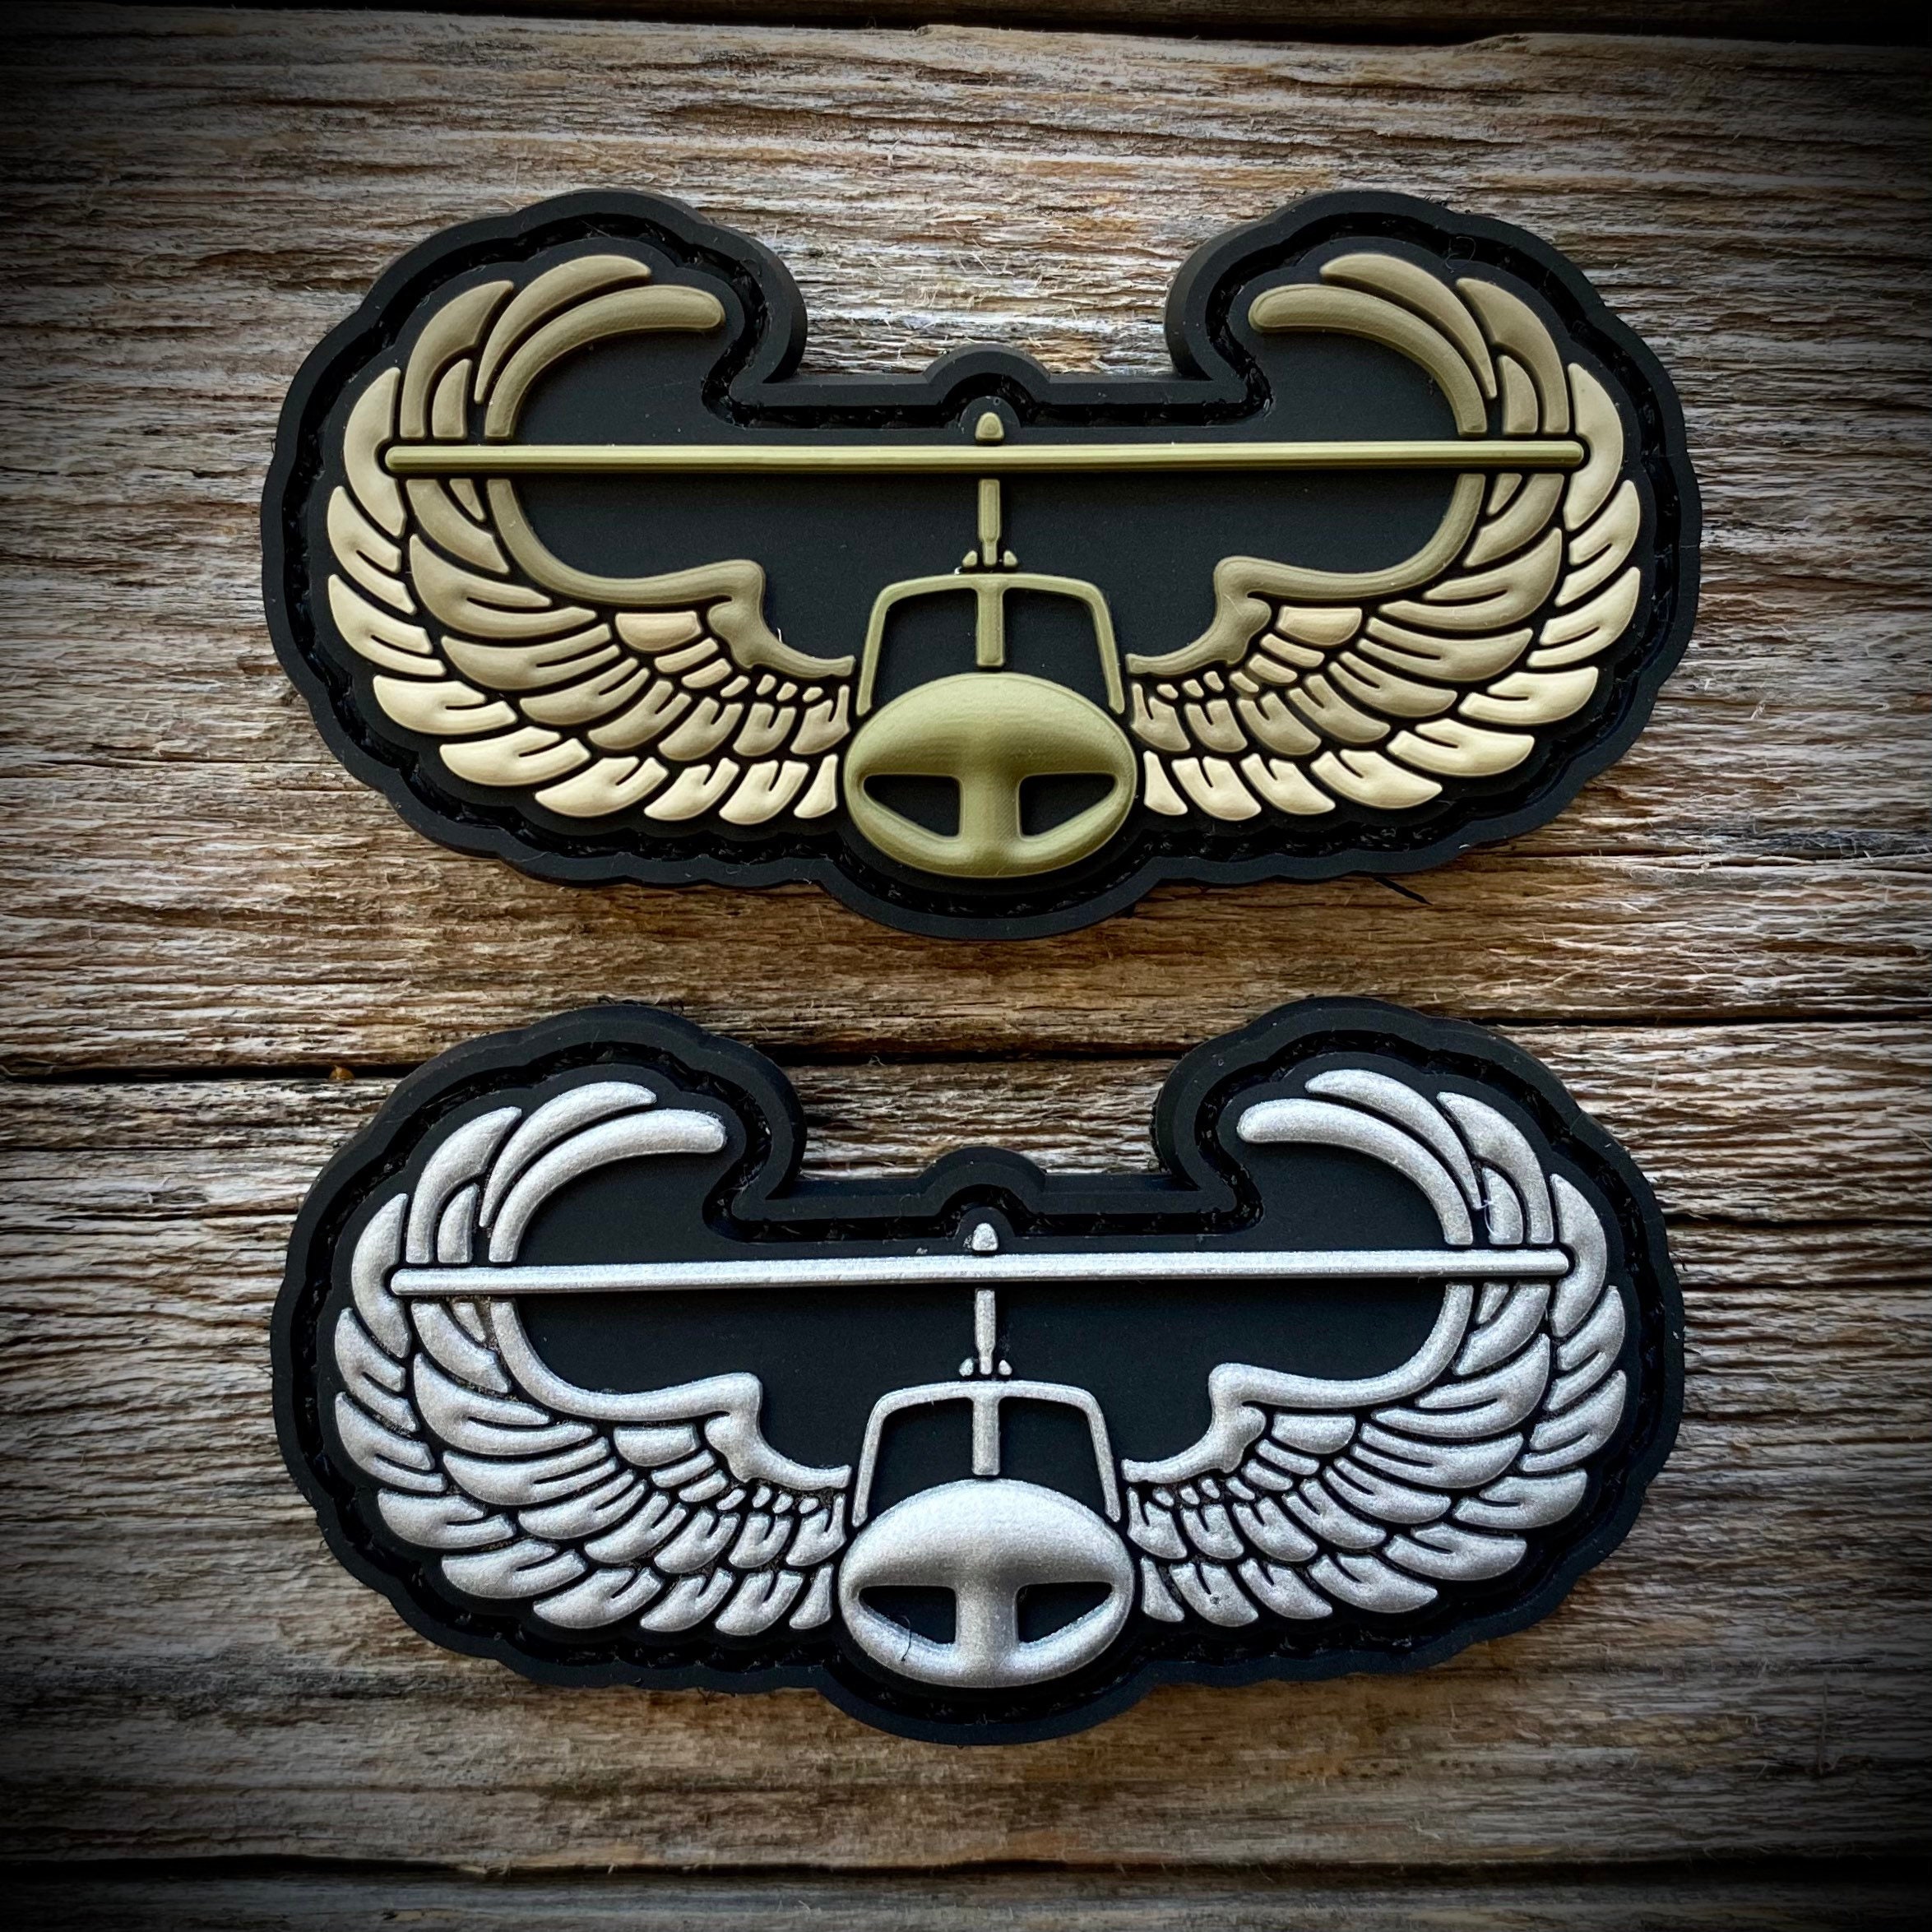 Air Assault Badge Morale Patch.2x3 Hook and Loop Patch. Made in The USA